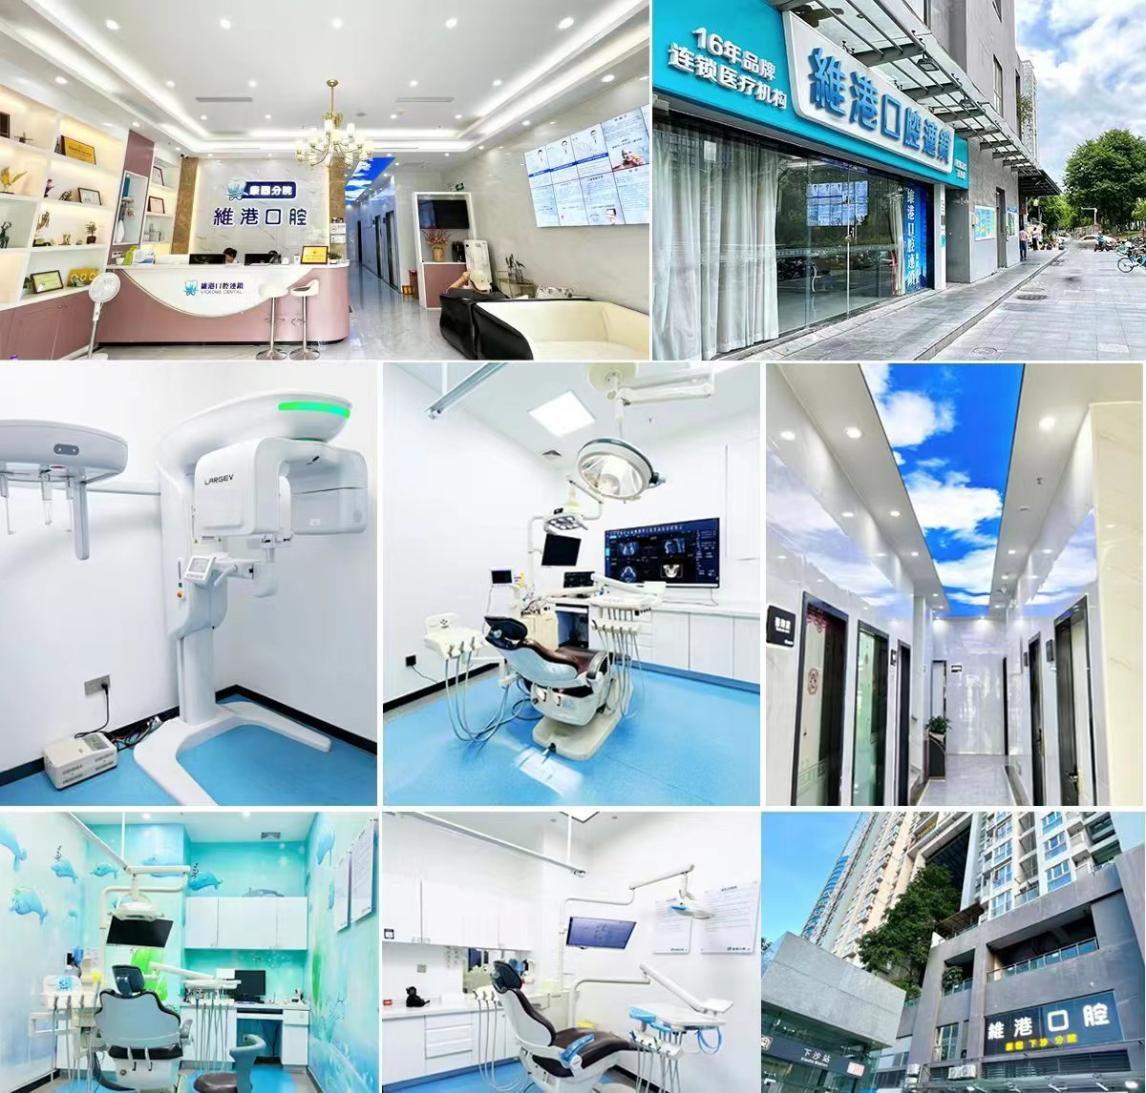 Port dental examination: different from the corresponding guidelines for medical treatment at the Weigang Dental Branch after customs clearance at the port